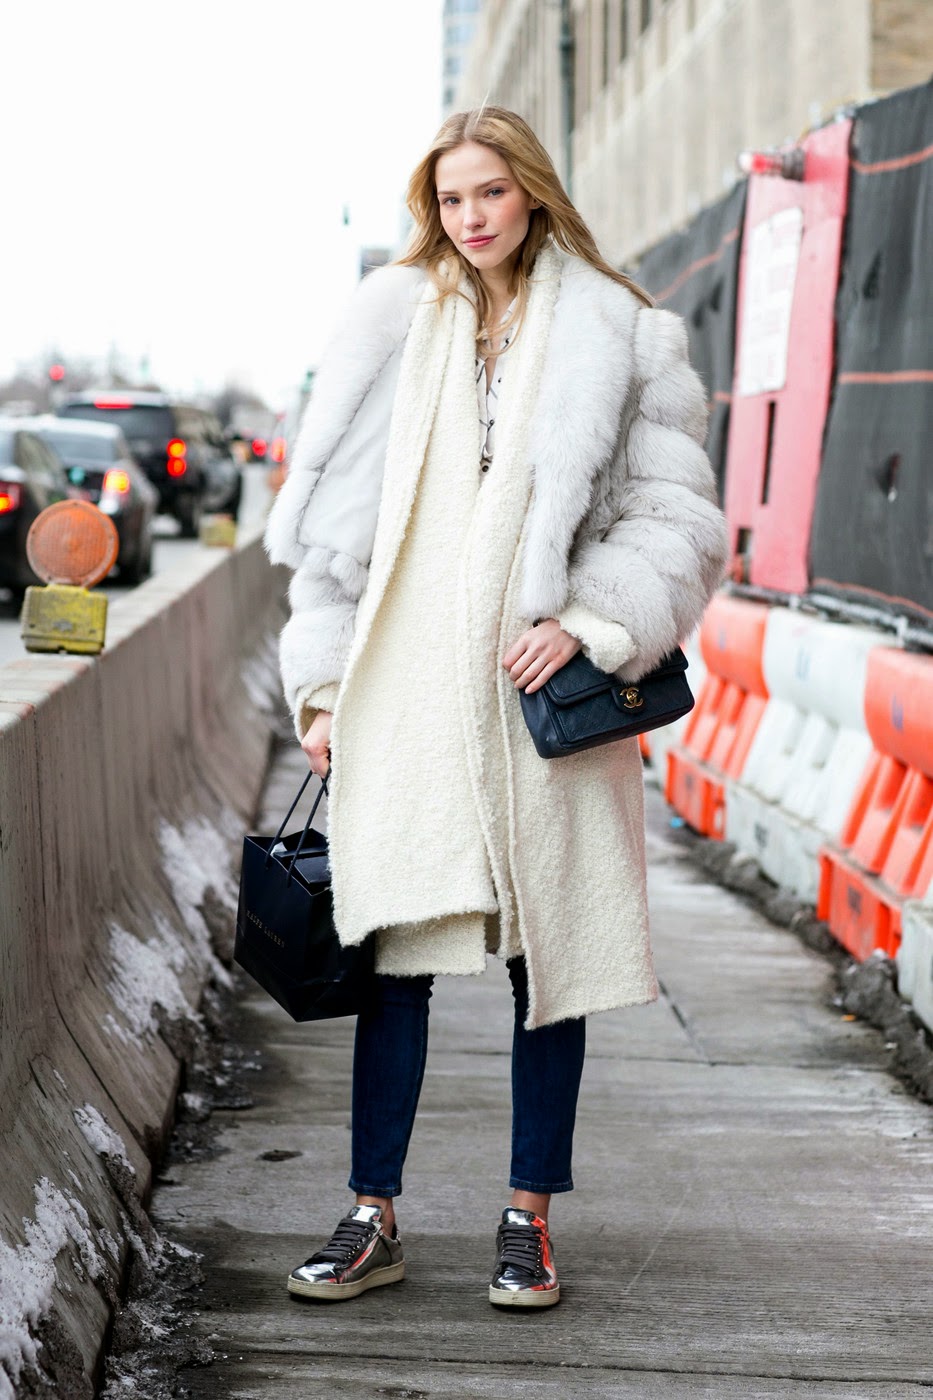 Model Street Style: Sasha Luss in NYC - The Front Row View